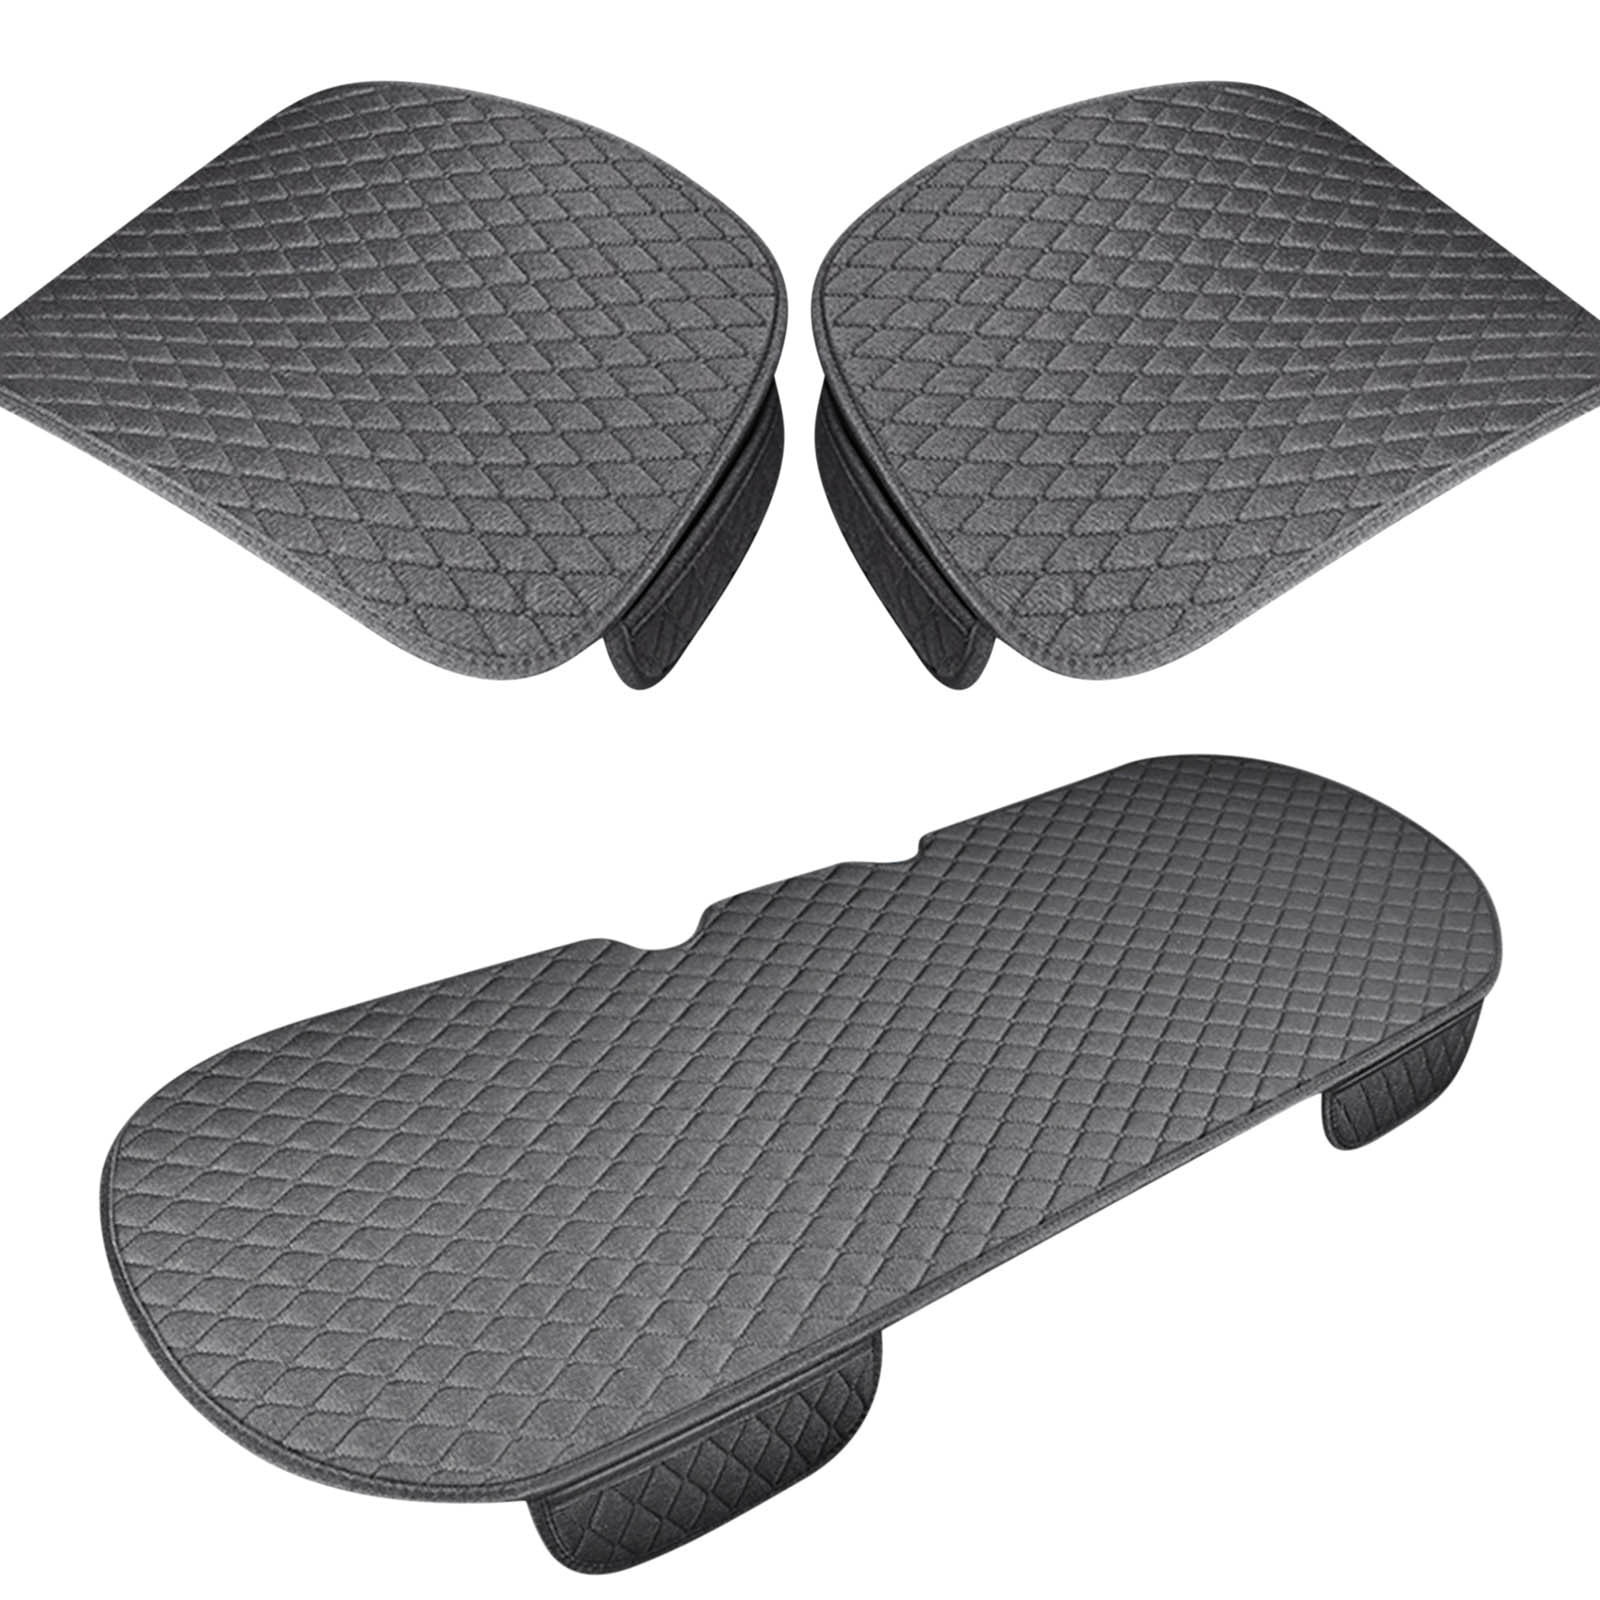 solacol Car Seat Covers Front Seats Only Car Seat Cushion Car Seat